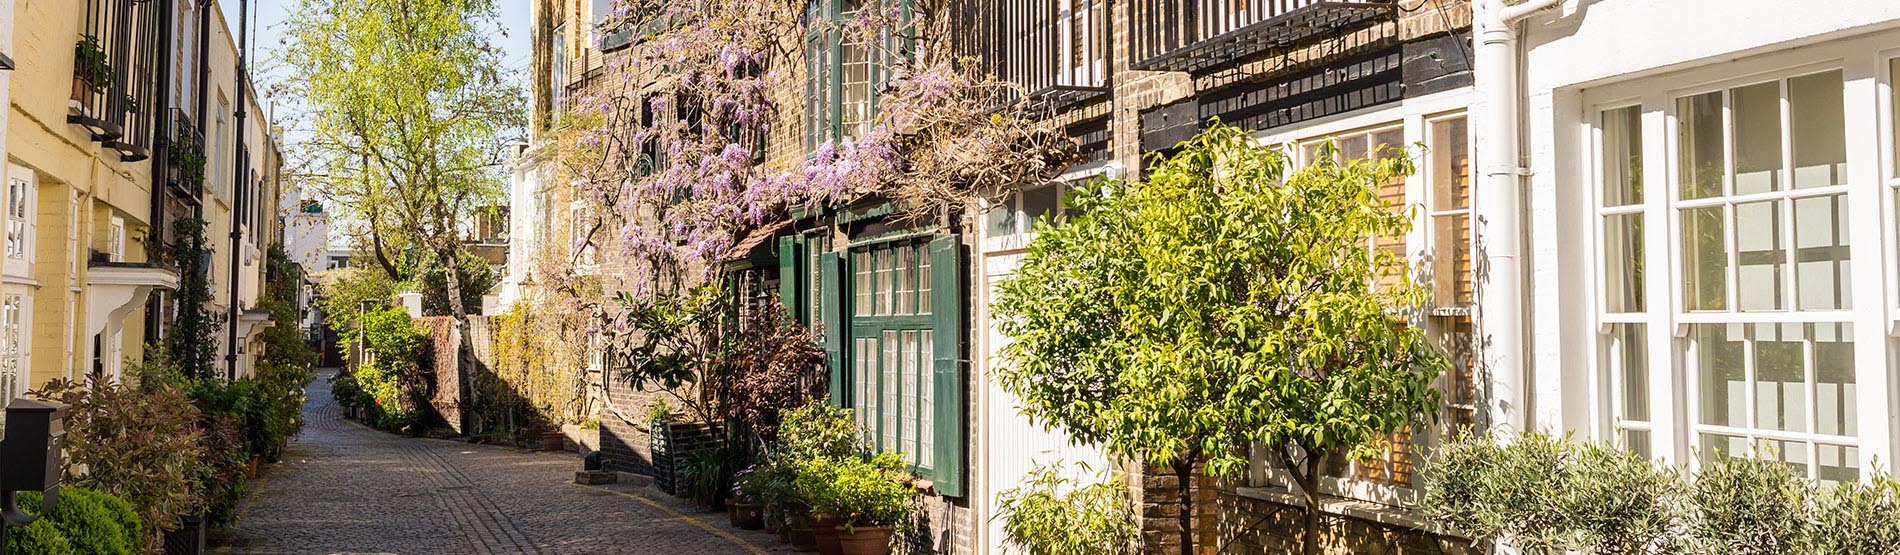 elegant houses in a mews with cobble stone street in south kensington